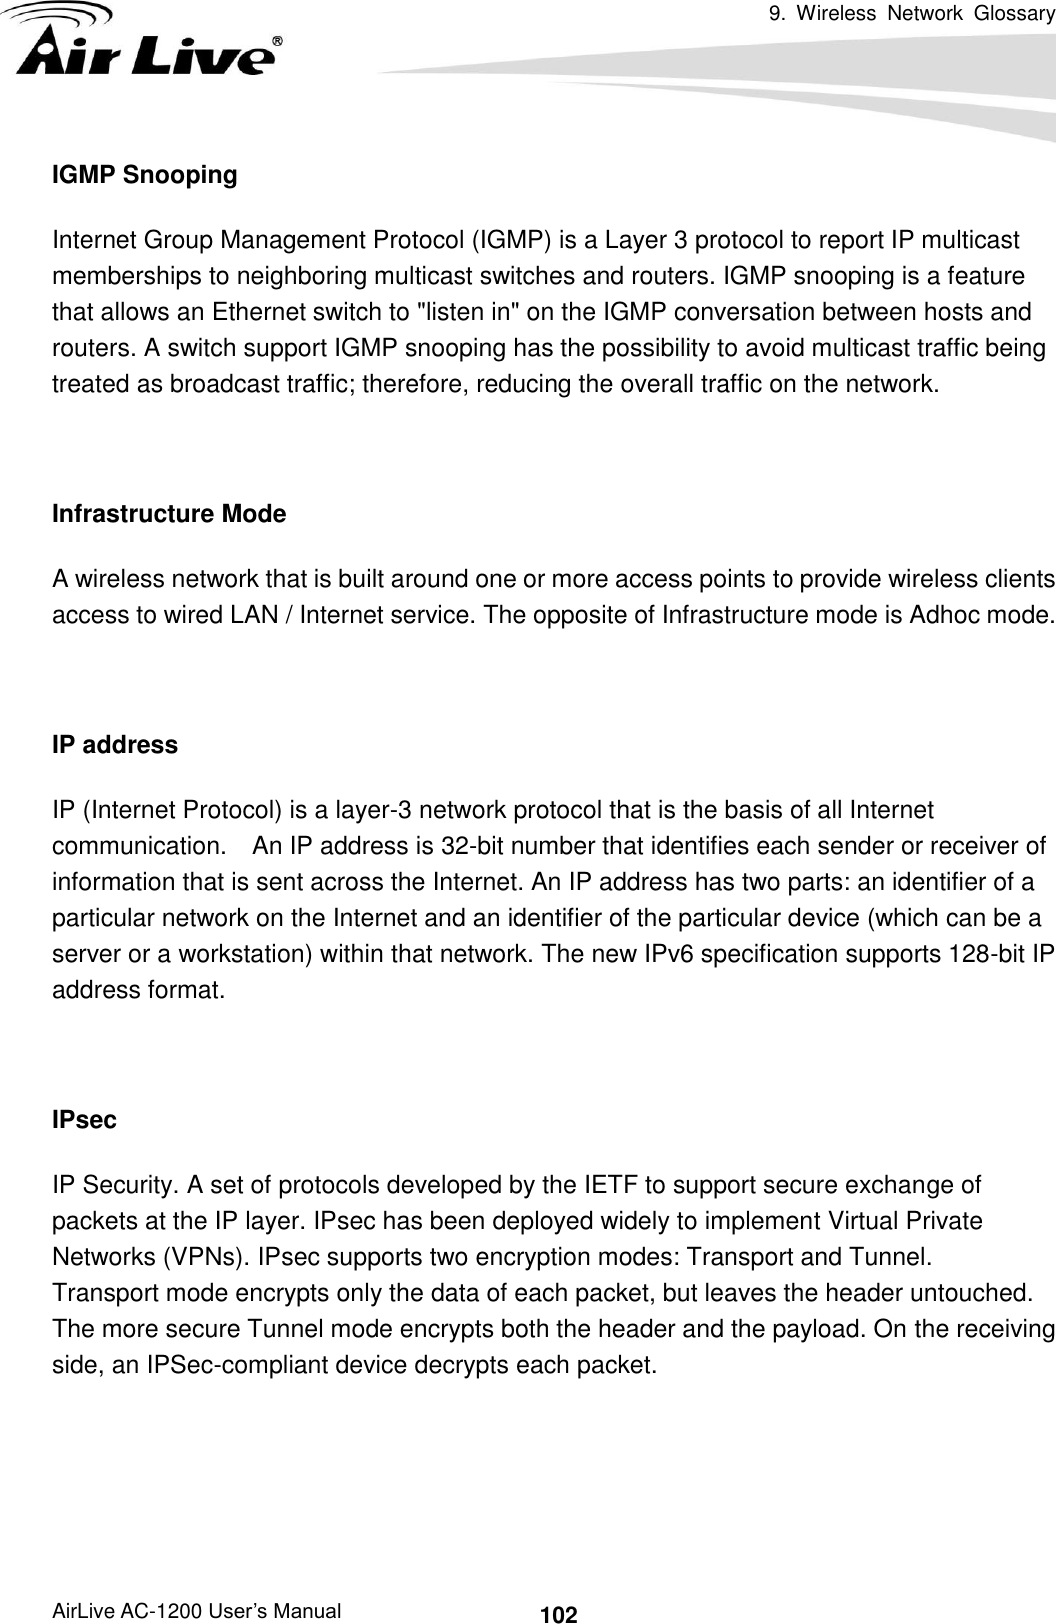 9.  Wireless  Network  Glossary      AirLive AC-1200 User’s Manual 102 IGMP Snooping Internet Group Management Protocol (IGMP) is a Layer 3 protocol to report IP multicast memberships to neighboring multicast switches and routers. IGMP snooping is a feature that allows an Ethernet switch to &quot;listen in&quot; on the IGMP conversation between hosts and routers. A switch support IGMP snooping has the possibility to avoid multicast traffic being treated as broadcast traffic; therefore, reducing the overall traffic on the network.  Infrastructure Mode A wireless network that is built around one or more access points to provide wireless clients access to wired LAN / Internet service. The opposite of Infrastructure mode is Adhoc mode.  IP address IP (Internet Protocol) is a layer-3 network protocol that is the basis of all Internet communication.    An IP address is 32-bit number that identifies each sender or receiver of information that is sent across the Internet. An IP address has two parts: an identifier of a particular network on the Internet and an identifier of the particular device (which can be a server or a workstation) within that network. The new IPv6 specification supports 128-bit IP address format.  IPsec IP Security. A set of protocols developed by the IETF to support secure exchange of packets at the IP layer. IPsec has been deployed widely to implement Virtual Private Networks (VPNs). IPsec supports two encryption modes: Transport and Tunnel.   Transport mode encrypts only the data of each packet, but leaves the header untouched.   The more secure Tunnel mode encrypts both the header and the payload. On the receiving side, an IPSec-compliant device decrypts each packet.    